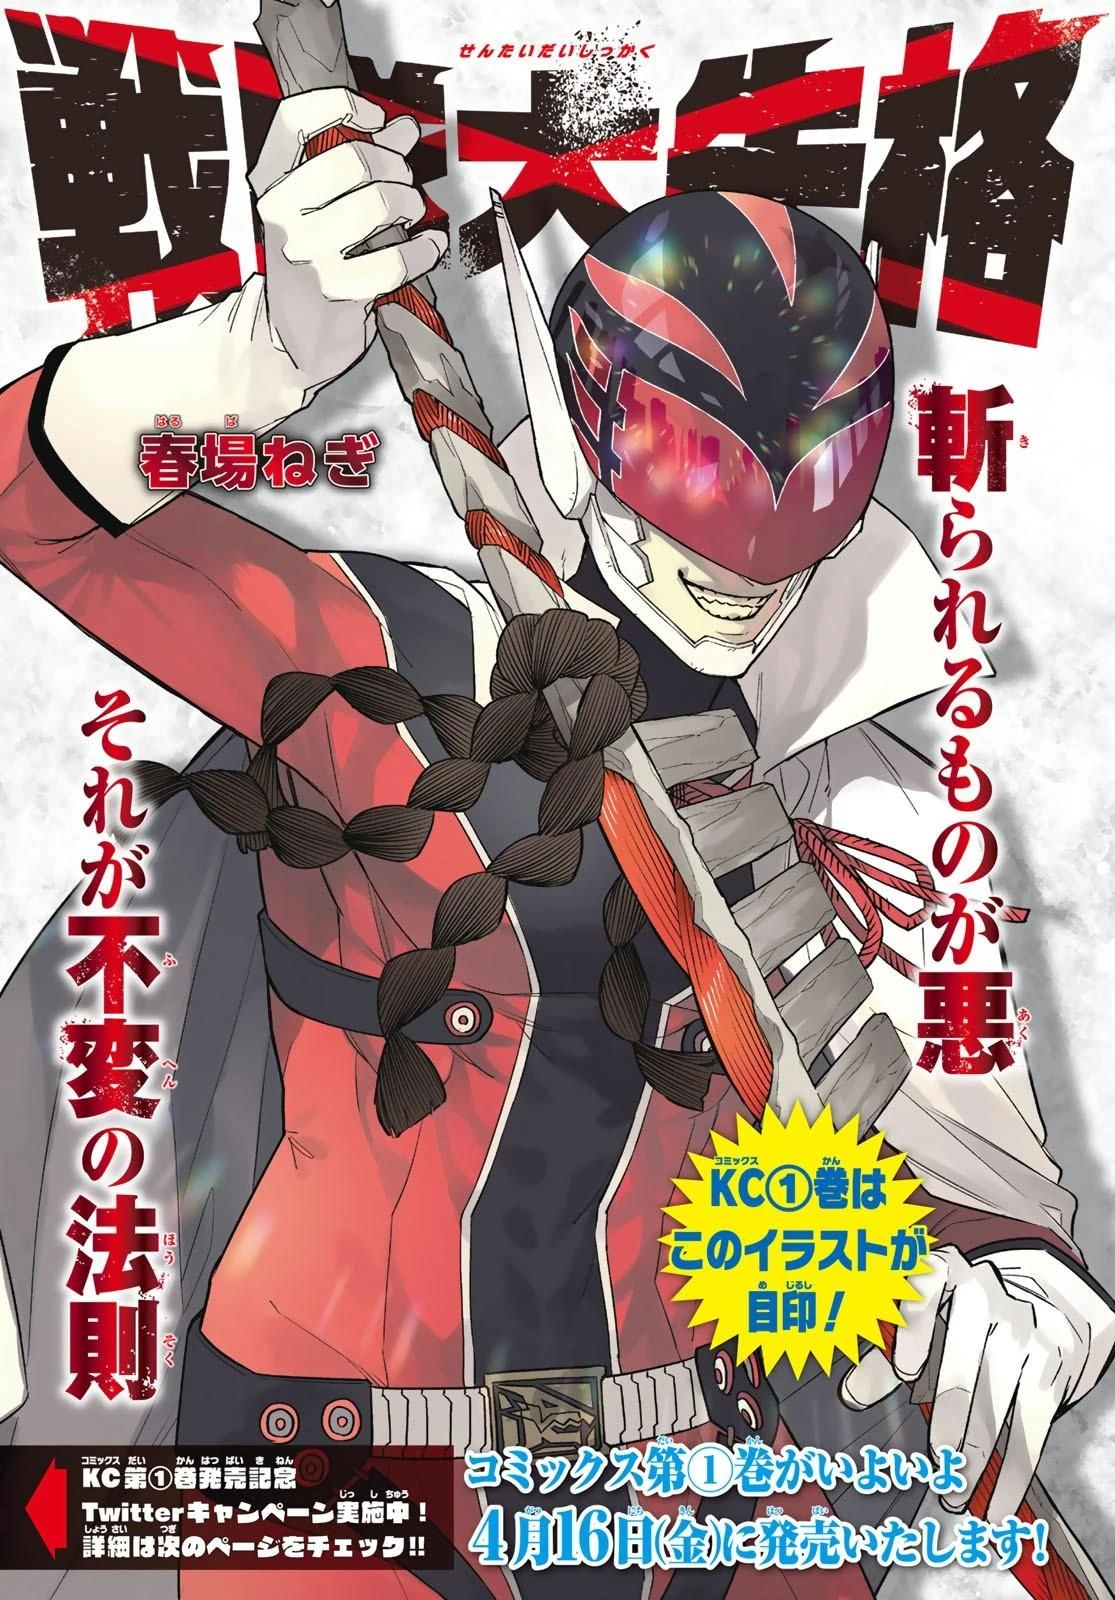 Red Dragon Keeper draws his Divine Tool on the cover to Ranger Reject Ch. 10 "The Power of One's Feelings" (2021), Kodansha via digital issue